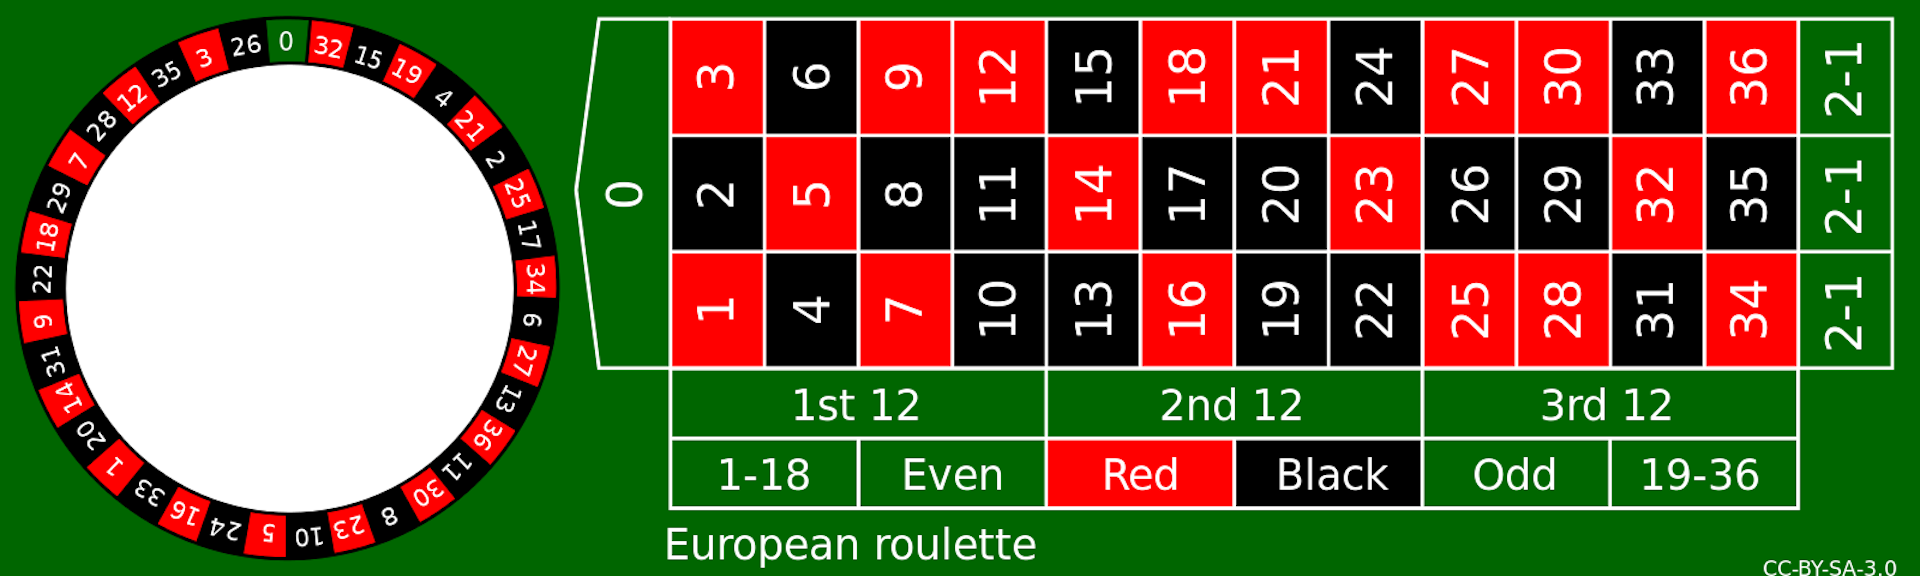 Roulette Table Odds Chart